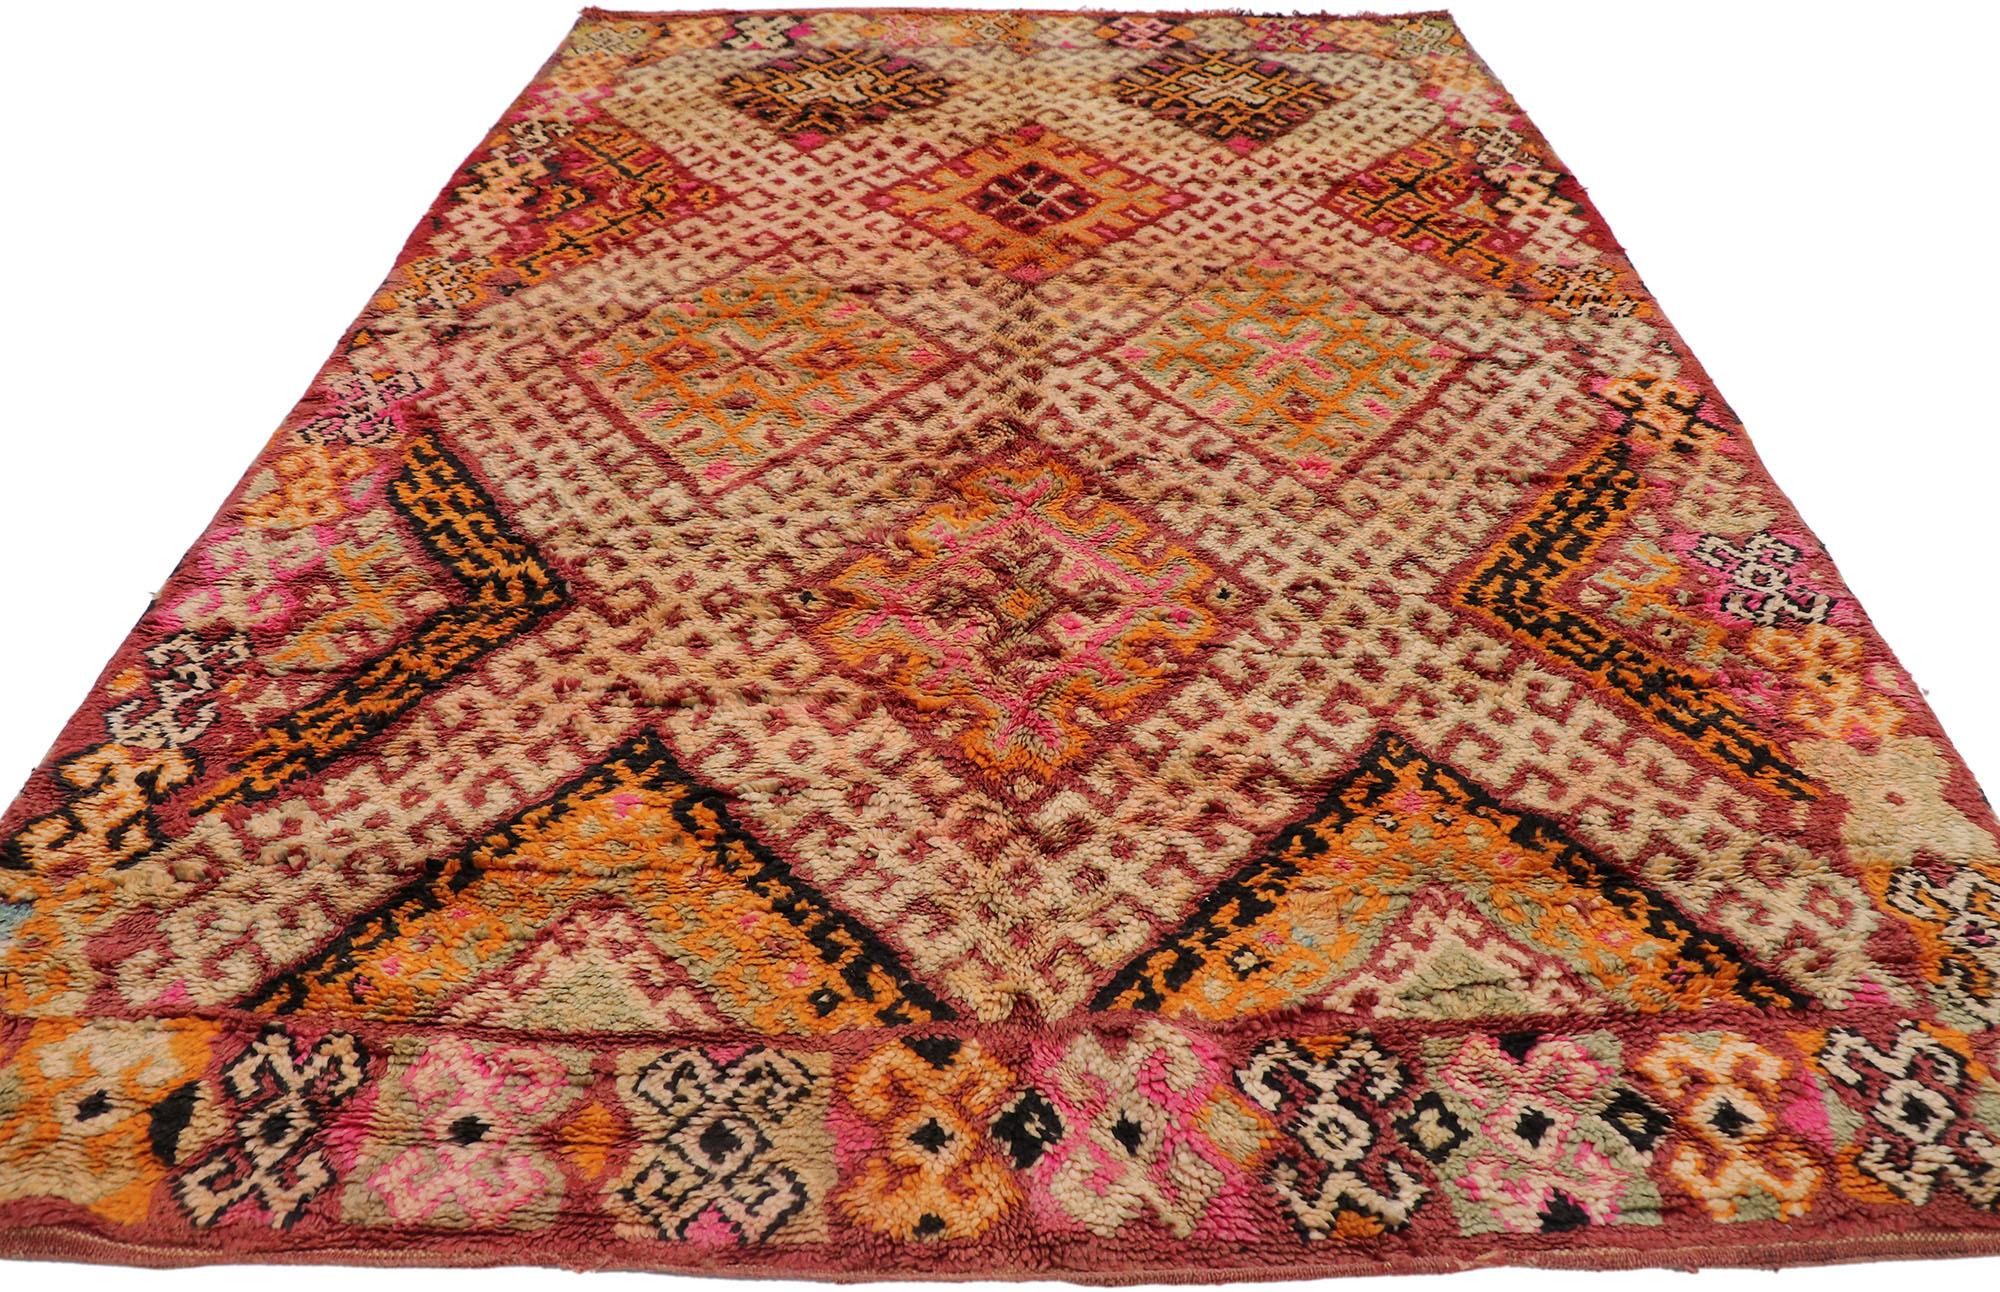 Hand-Knotted Vintage Beni MGuild Moroccan Rug, Midcentury Modern Meets Bohemian For Sale